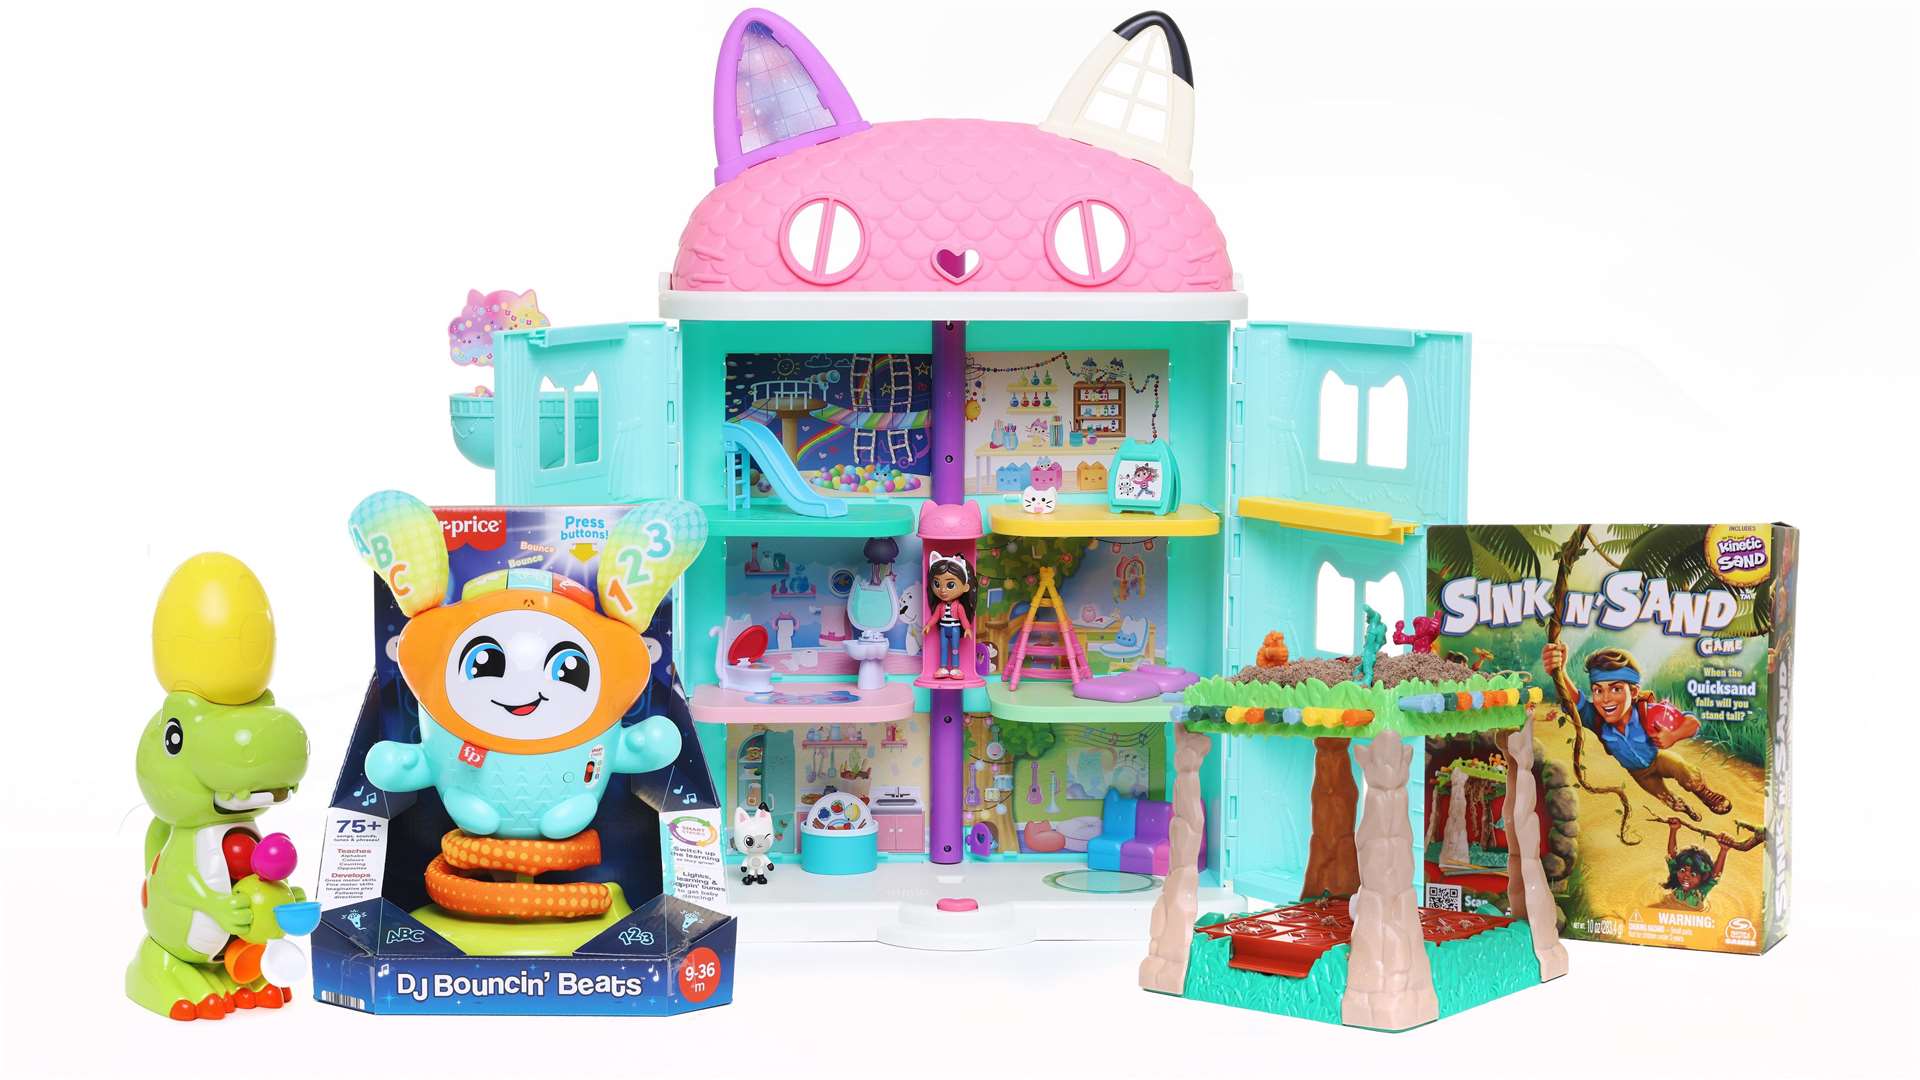 Argos releases its top toys for Christmas 2022 with releases from Lego, Barbie, Paw Patrol and Bluey all in the mix